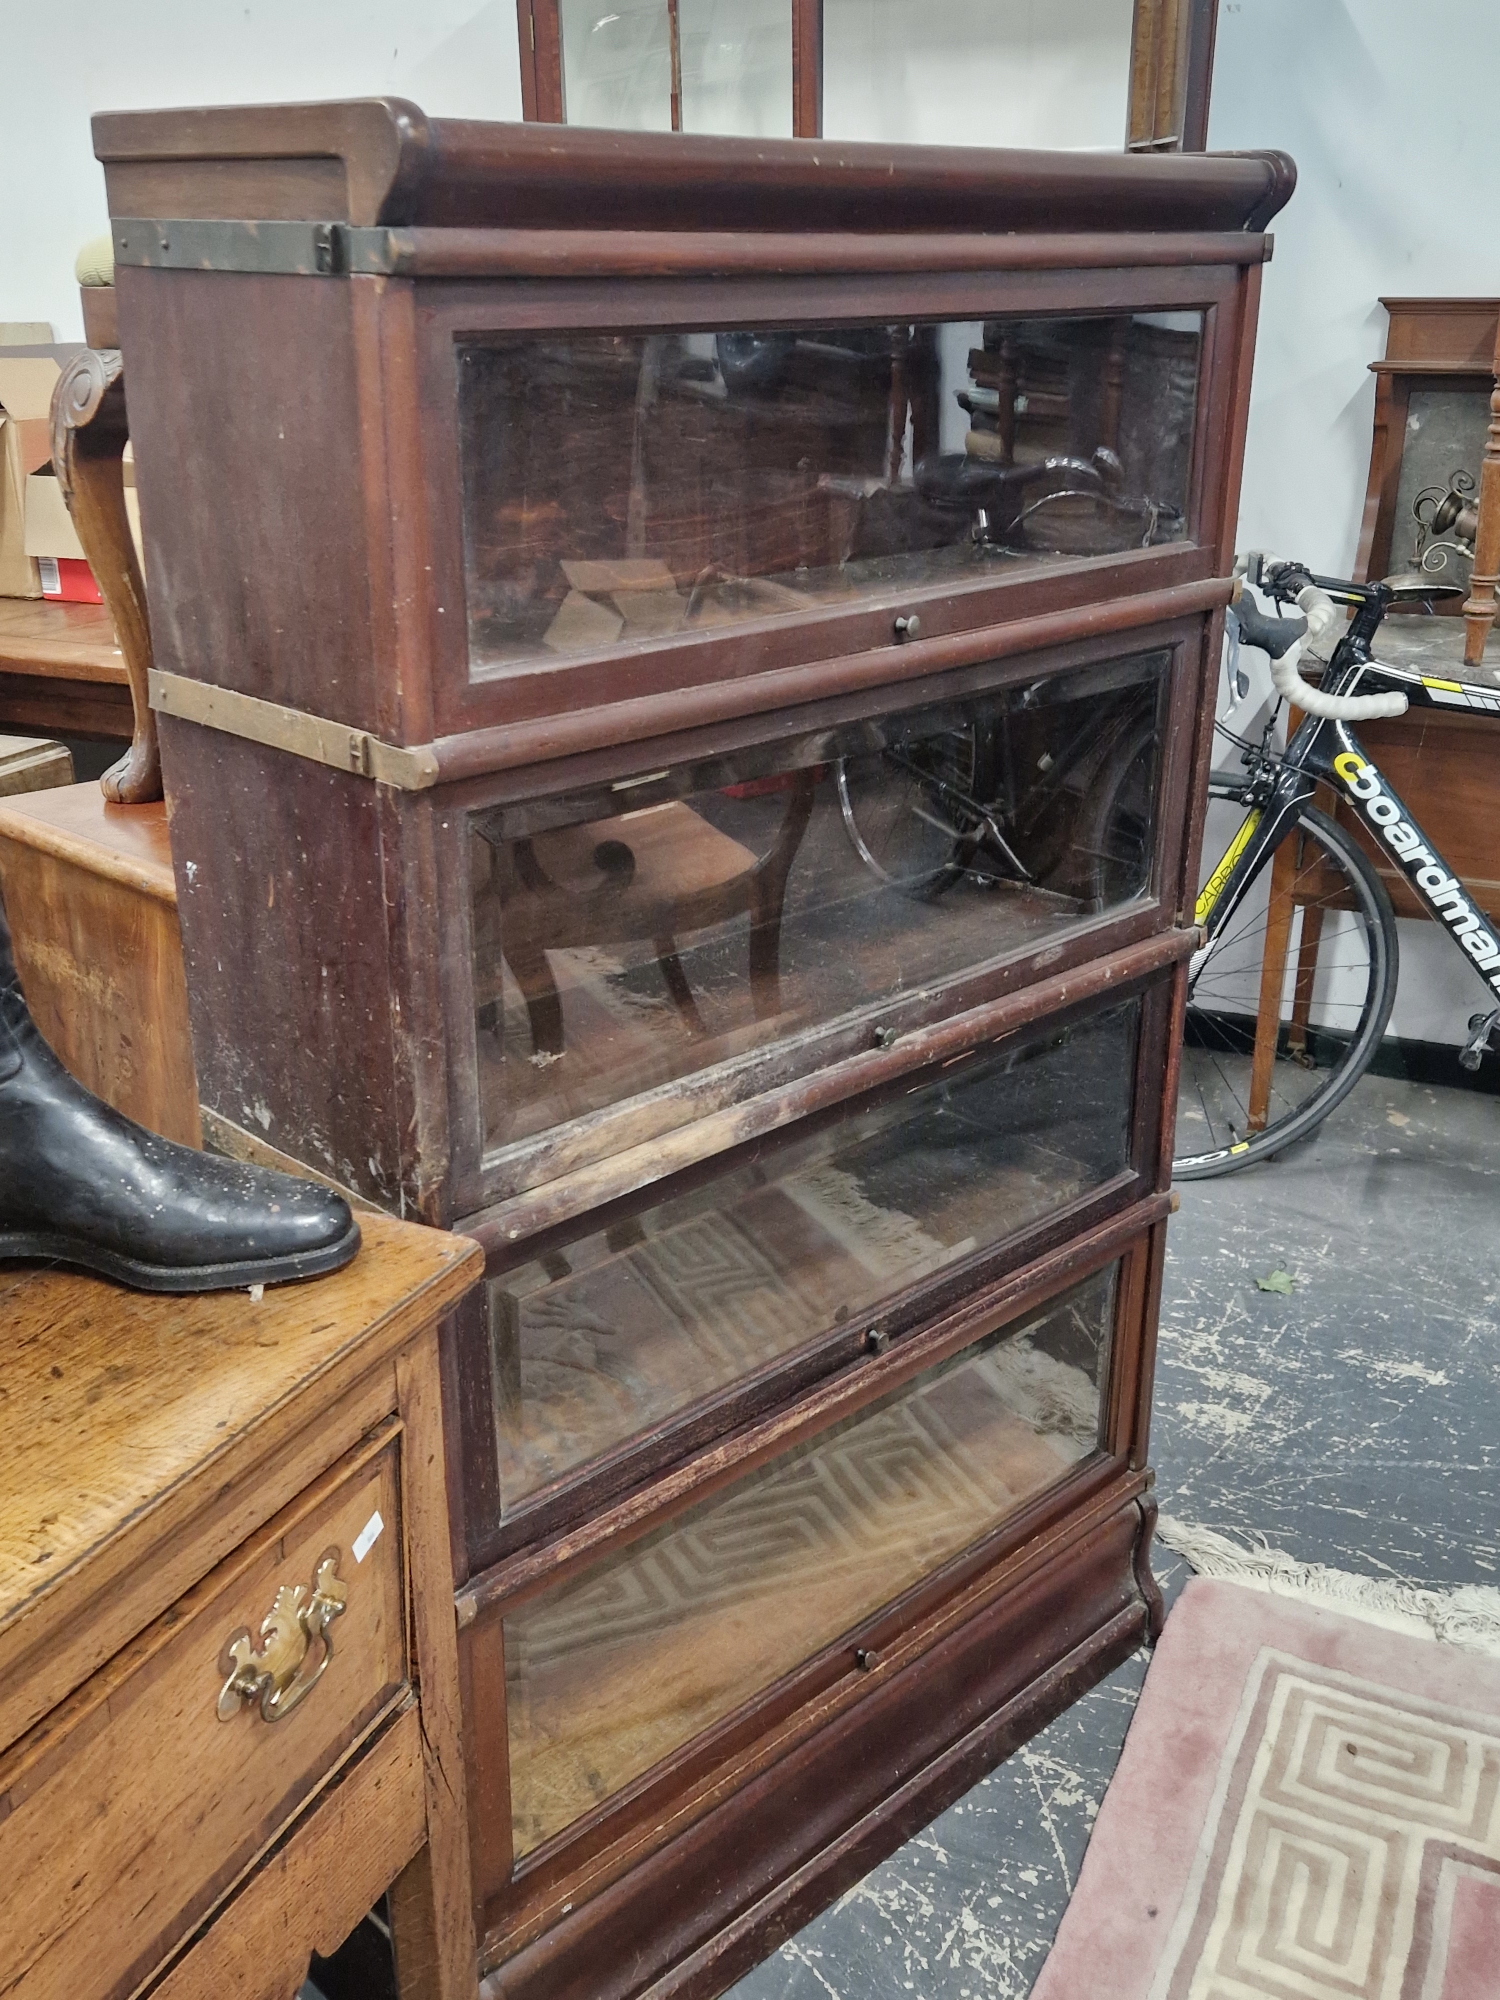 TWO GLOBE WERNICKE GLAZED MAHOGANY FOUR TIER BOOKCASES - Image 2 of 2